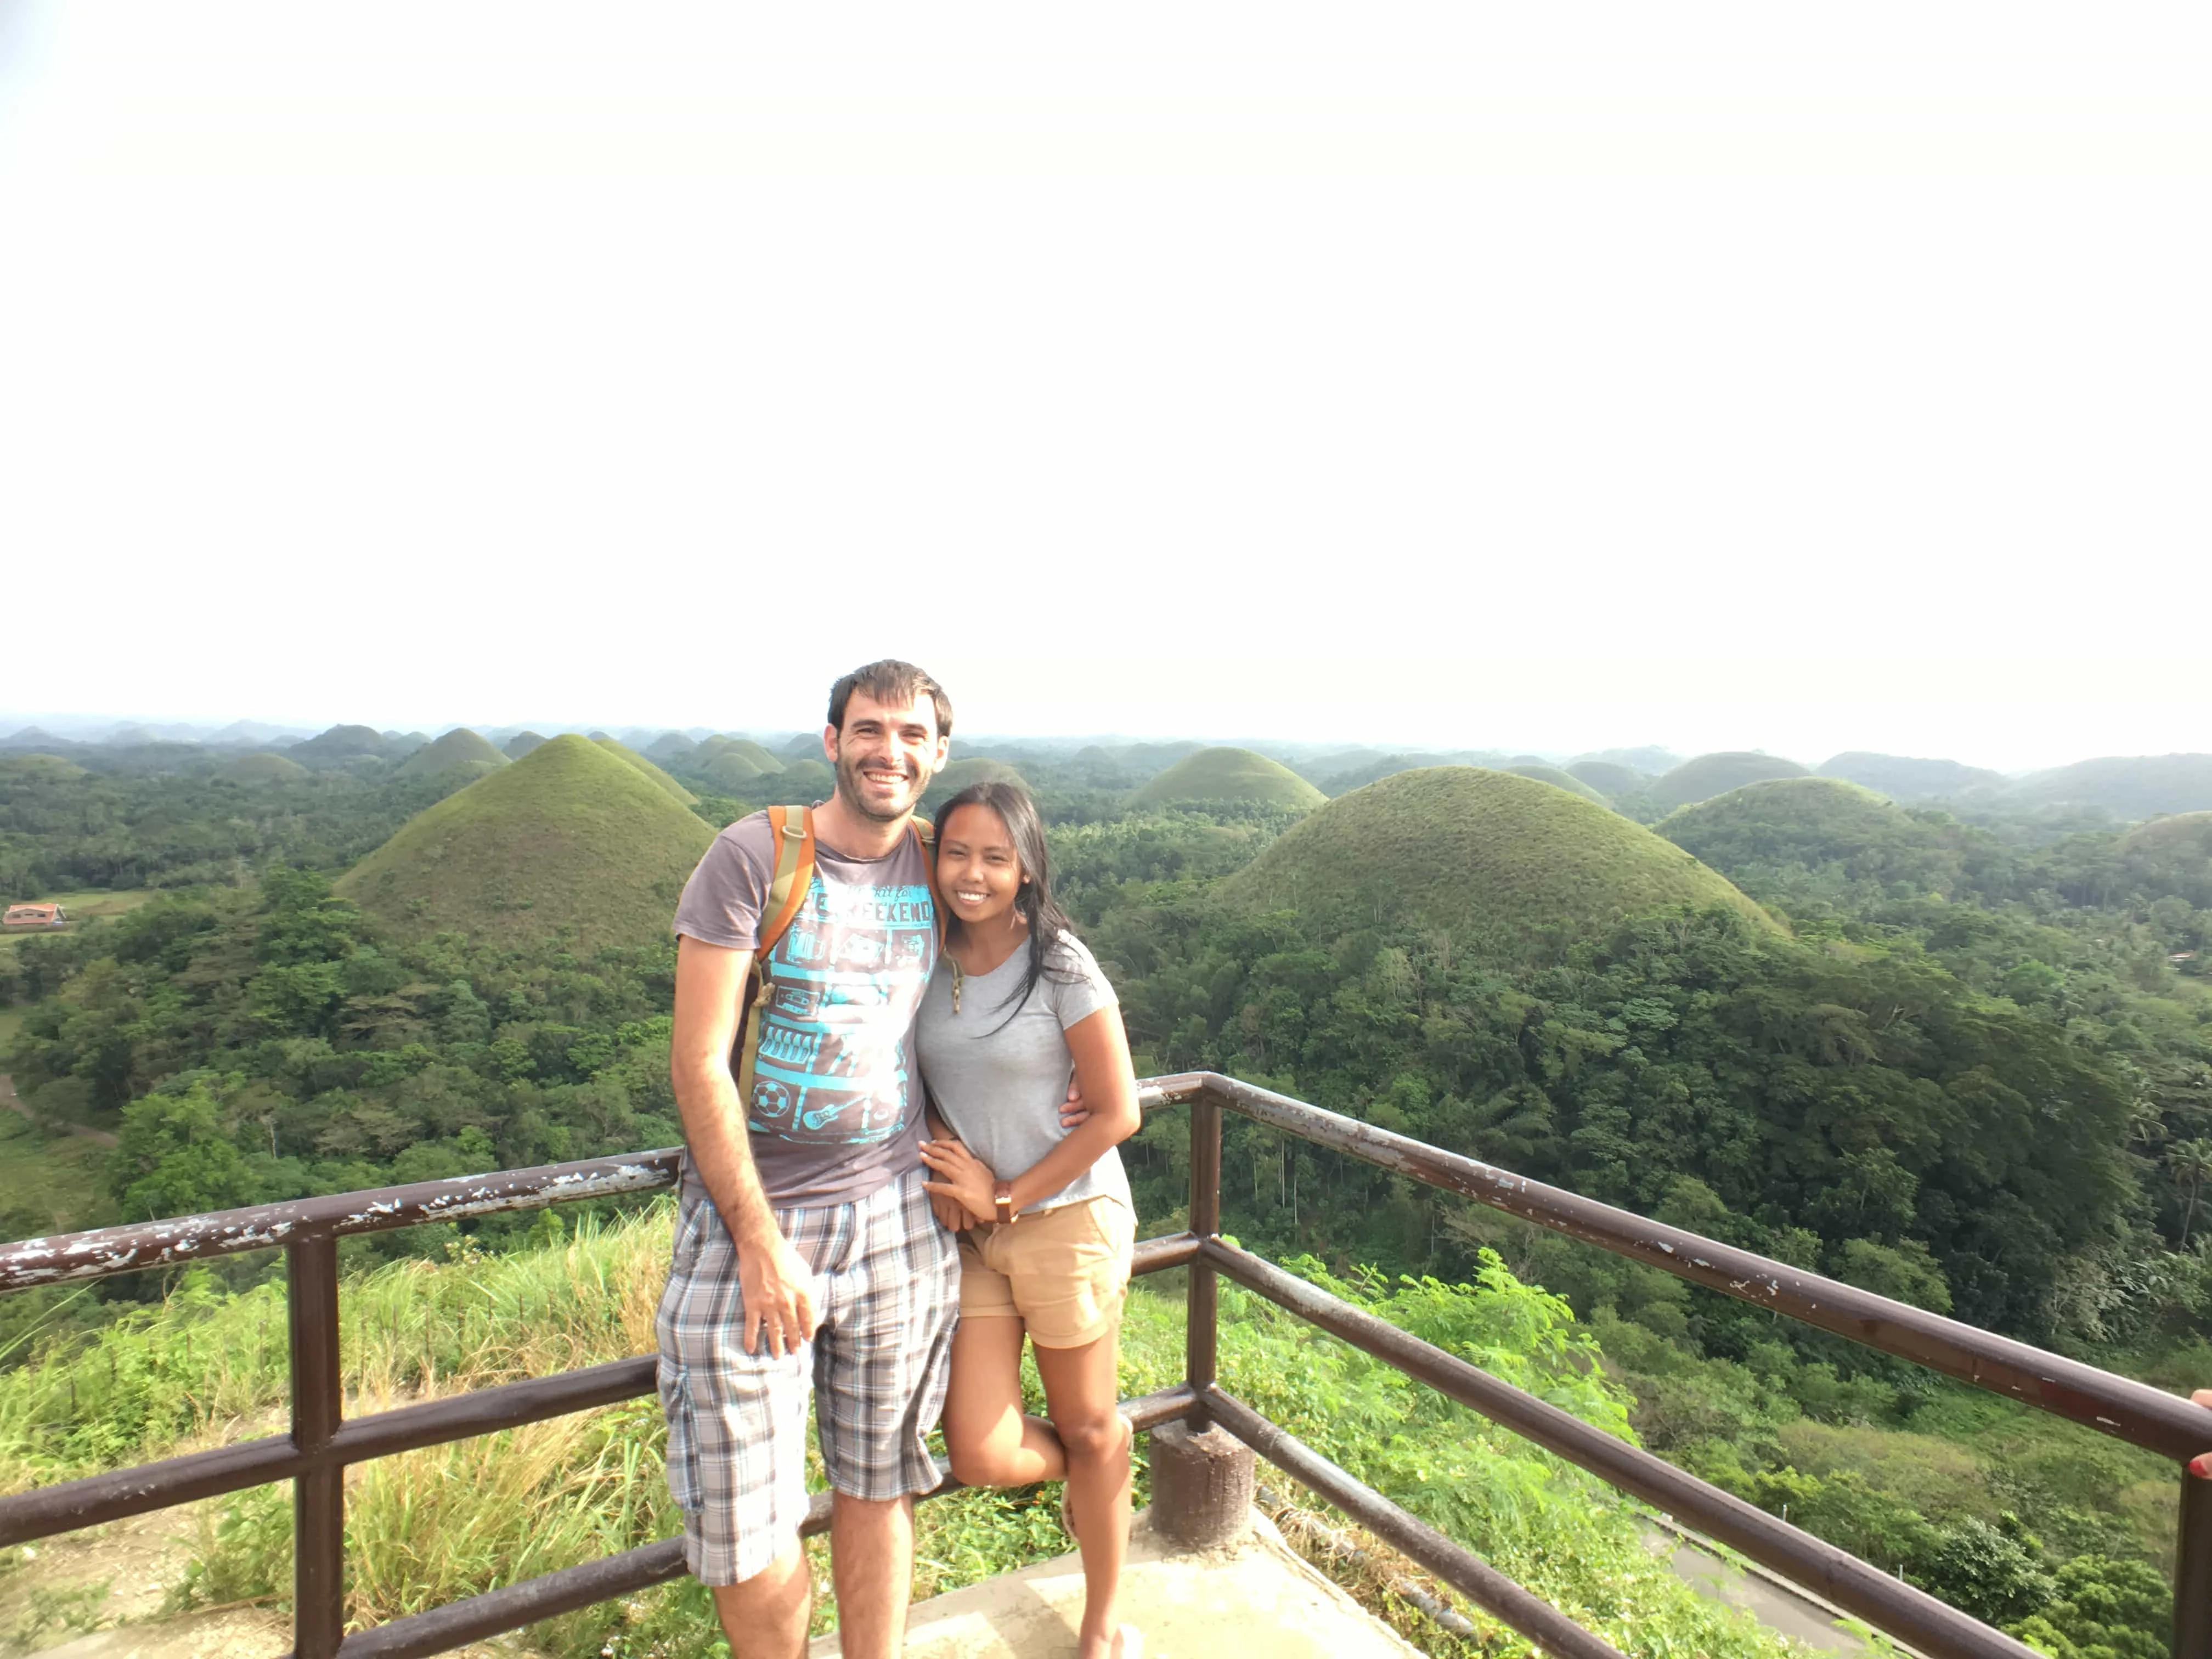 things to do in bohol, bohol tourist spots, chocolate hills in bohol, bohol tourist spots itinerary, bohol tourist spots, what to do in loboc bohol, where to stay in bohol, how to get to bohol